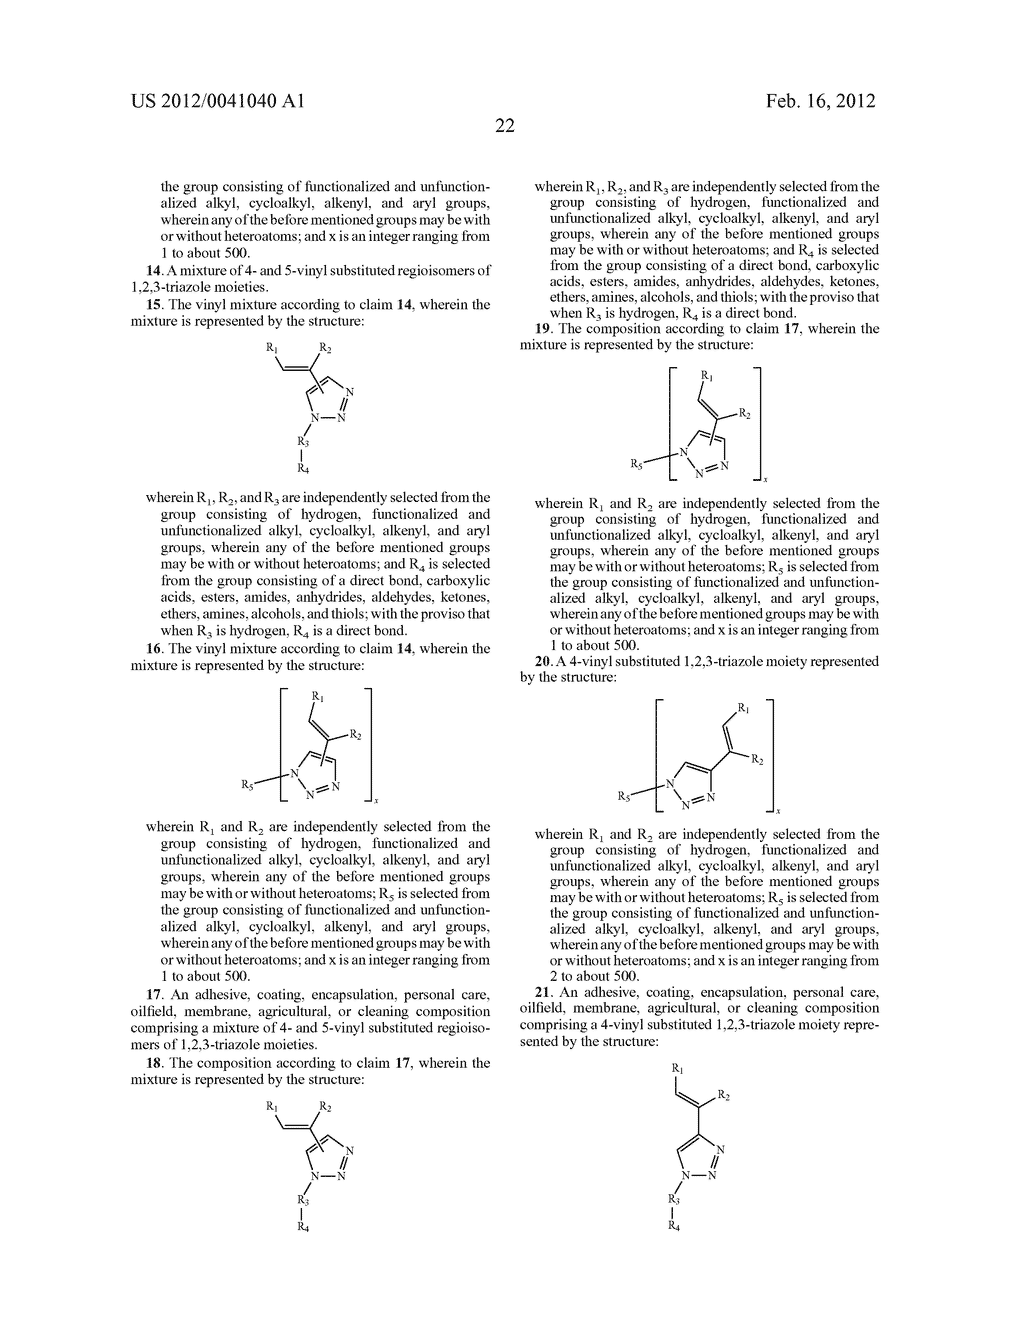 FUNCTIONALIZED 4- AND 5-VINYL SUBSTITUTED REGIOISOMERS OF 1, 2,     3-TRIAZOLES VIA 1, 3-DIPOLAR CYCLOADDITION AND POLYMERS THEREOF - diagram, schematic, and image 23